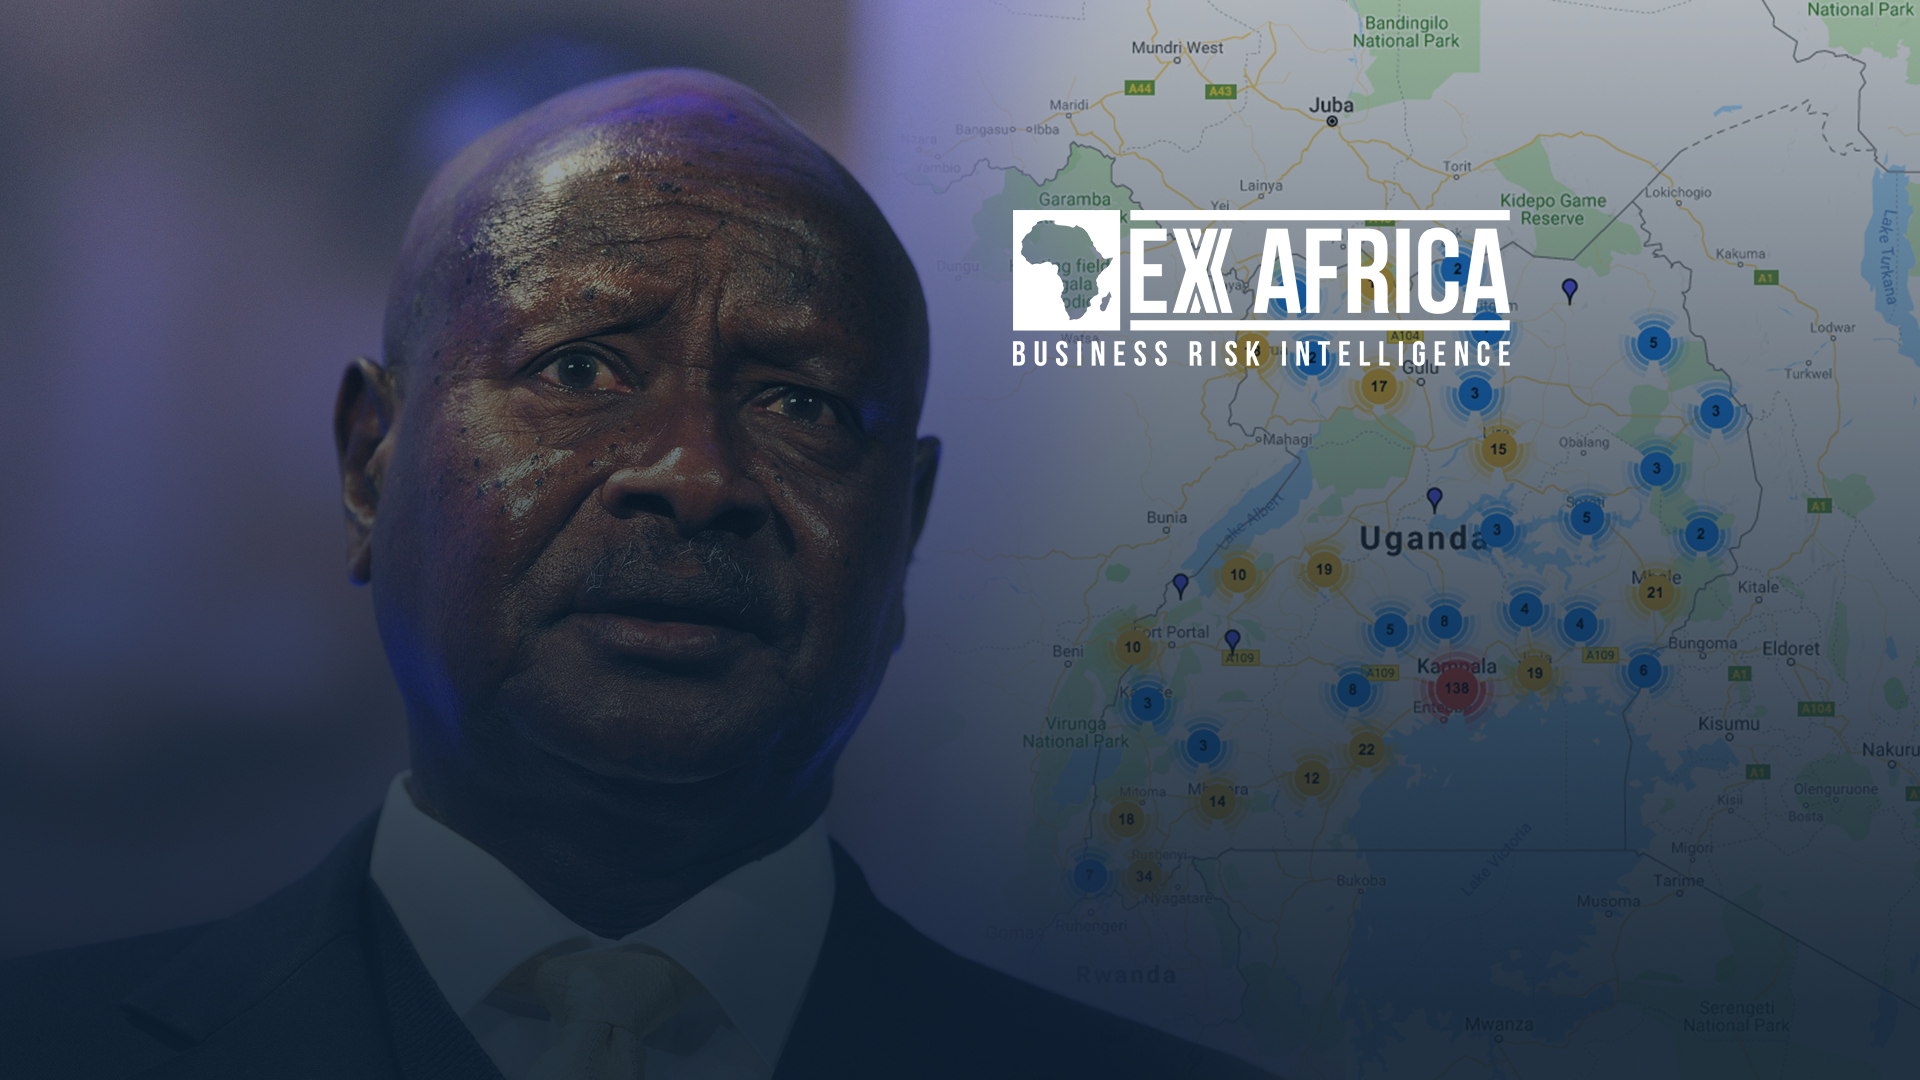 UGANDA: TRADE DISPUTE AND OPPOSITION TRIAL DESTABILISE OUTLOOK TOWARDS 2021 ELECTIONS